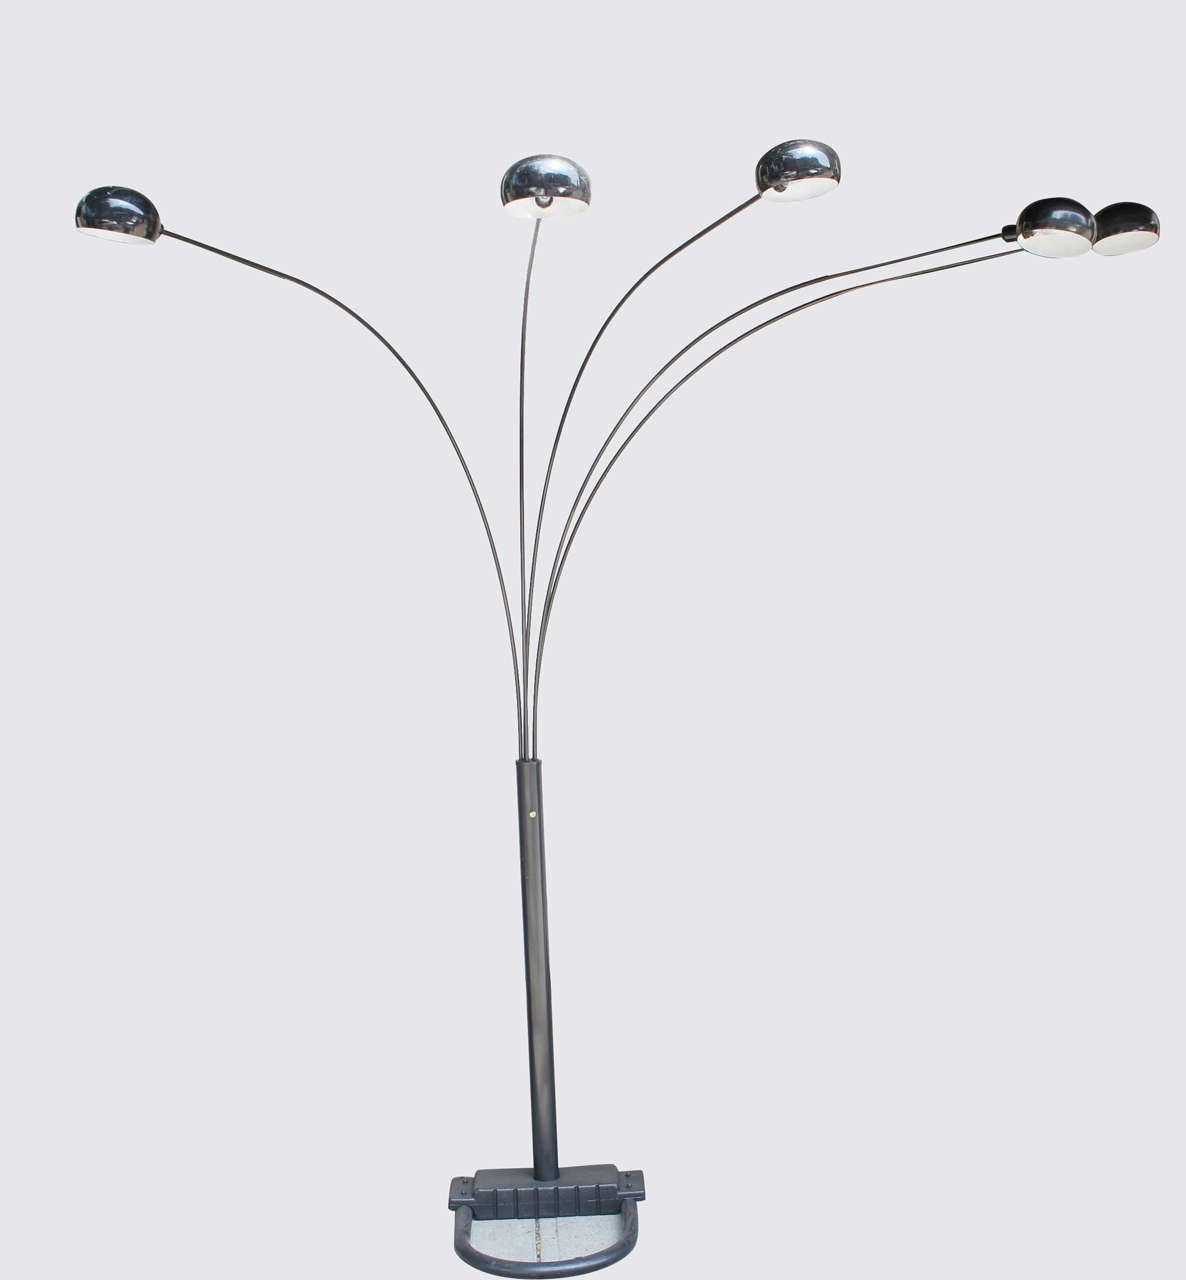 Arms can be swong from side to side, adjustable floor lamp with five arms